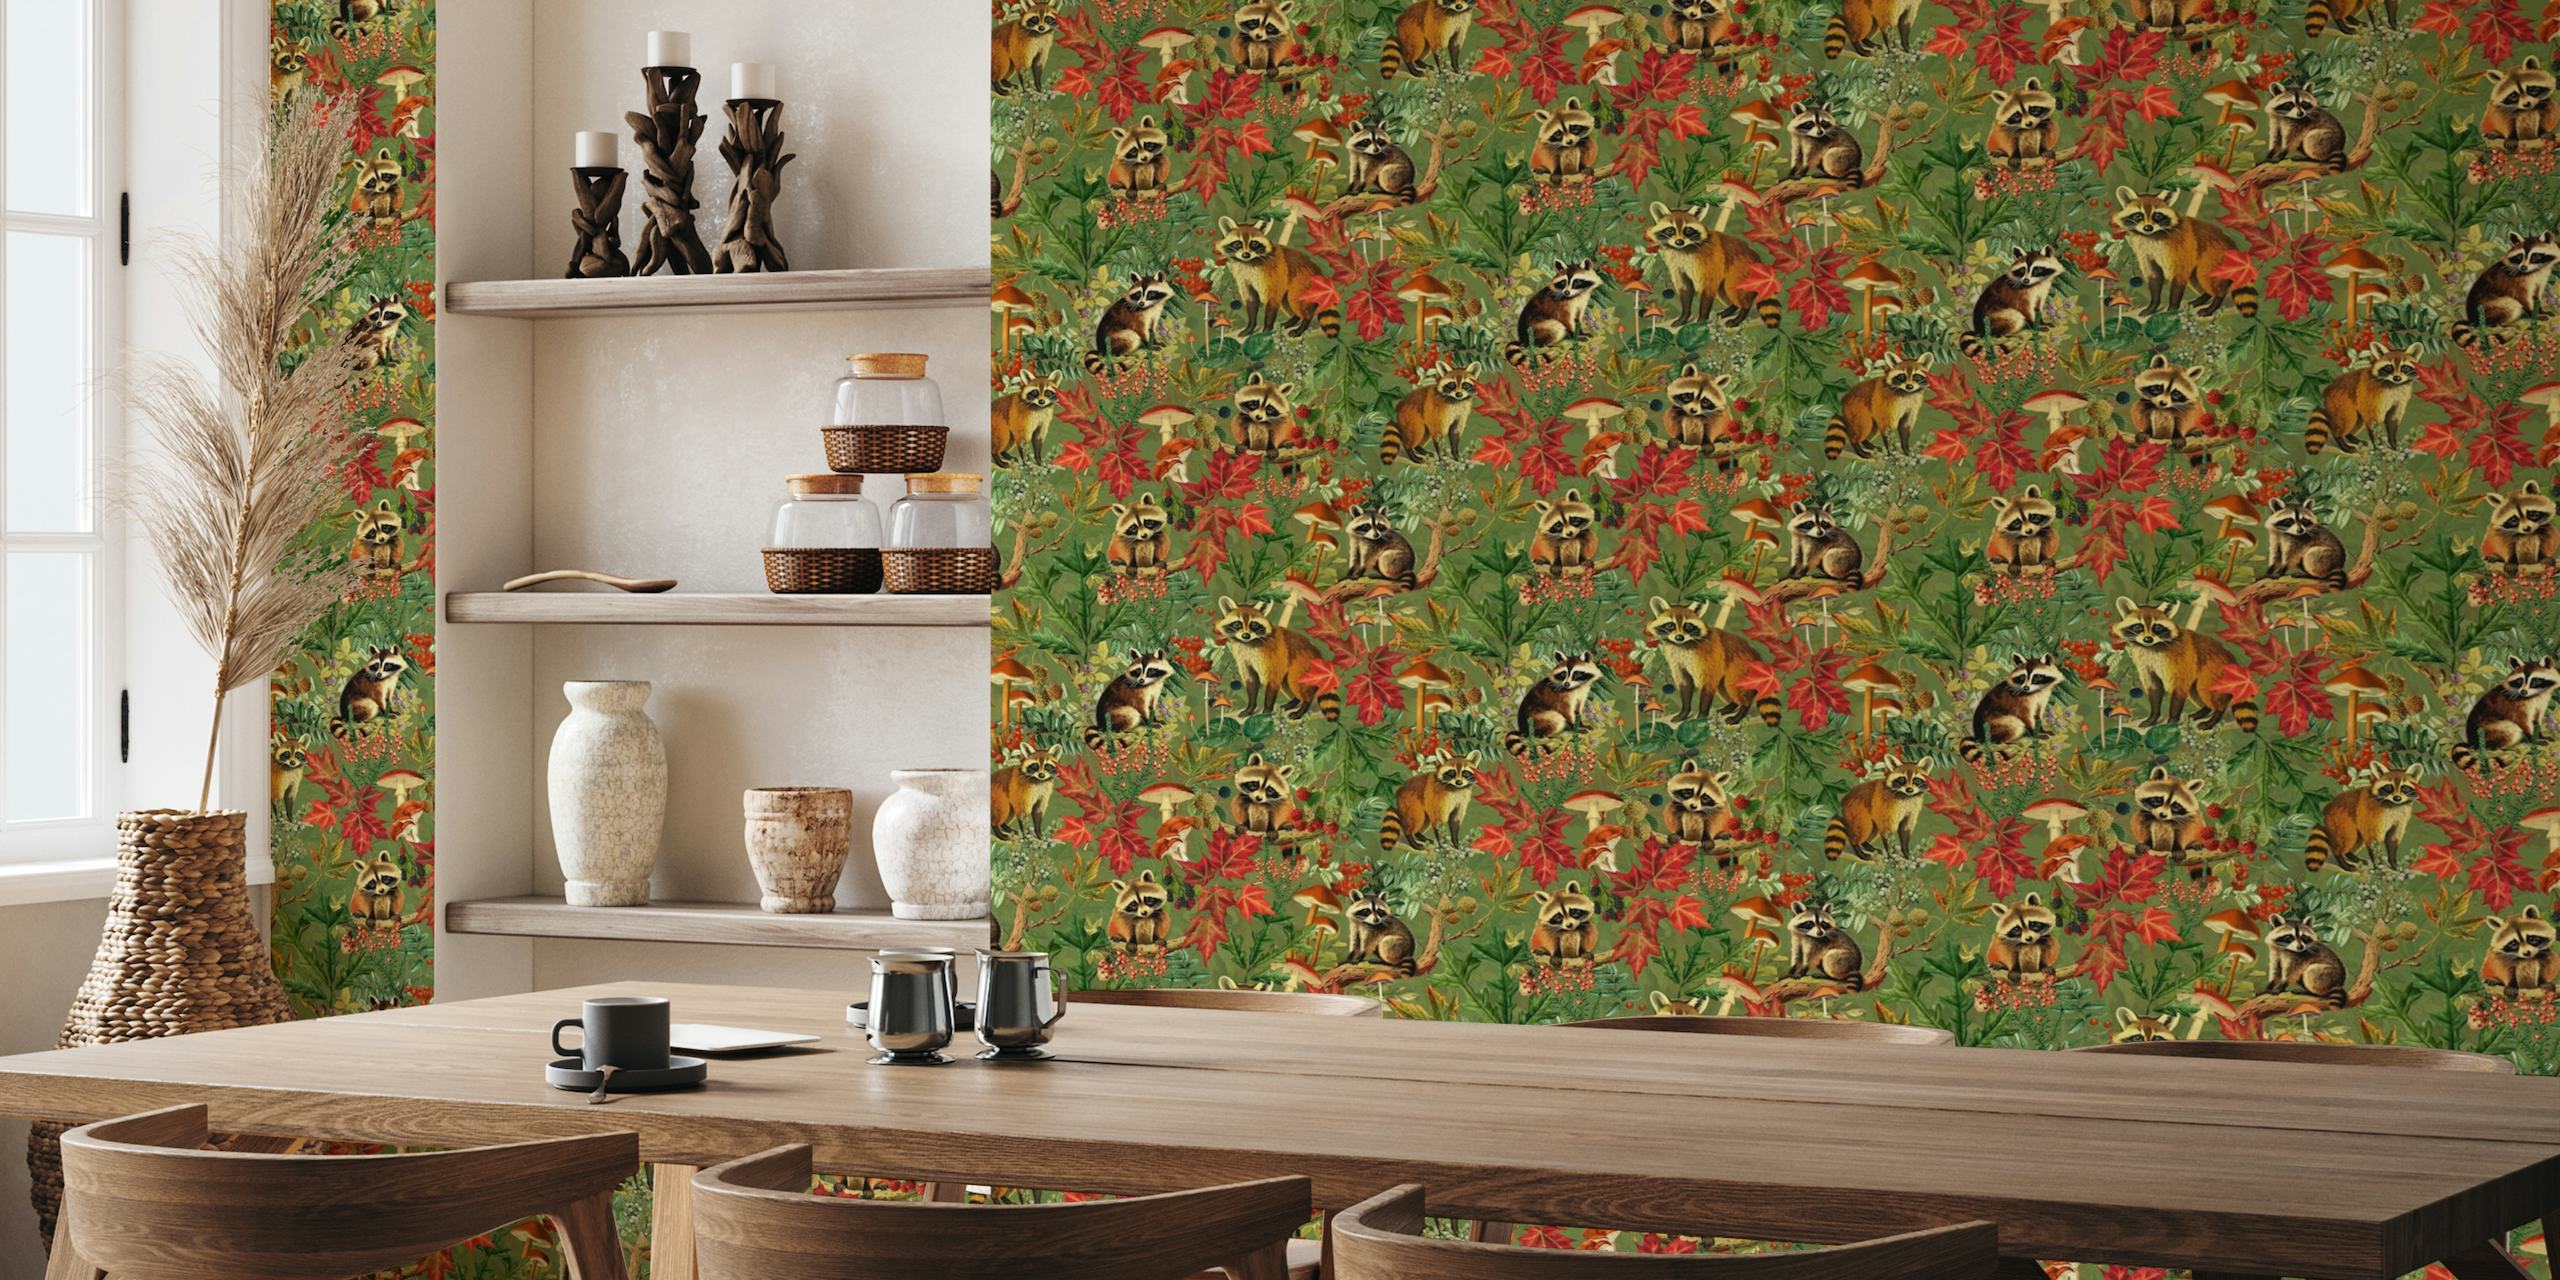 Raccoons in a forest with autumn leaves wall mural